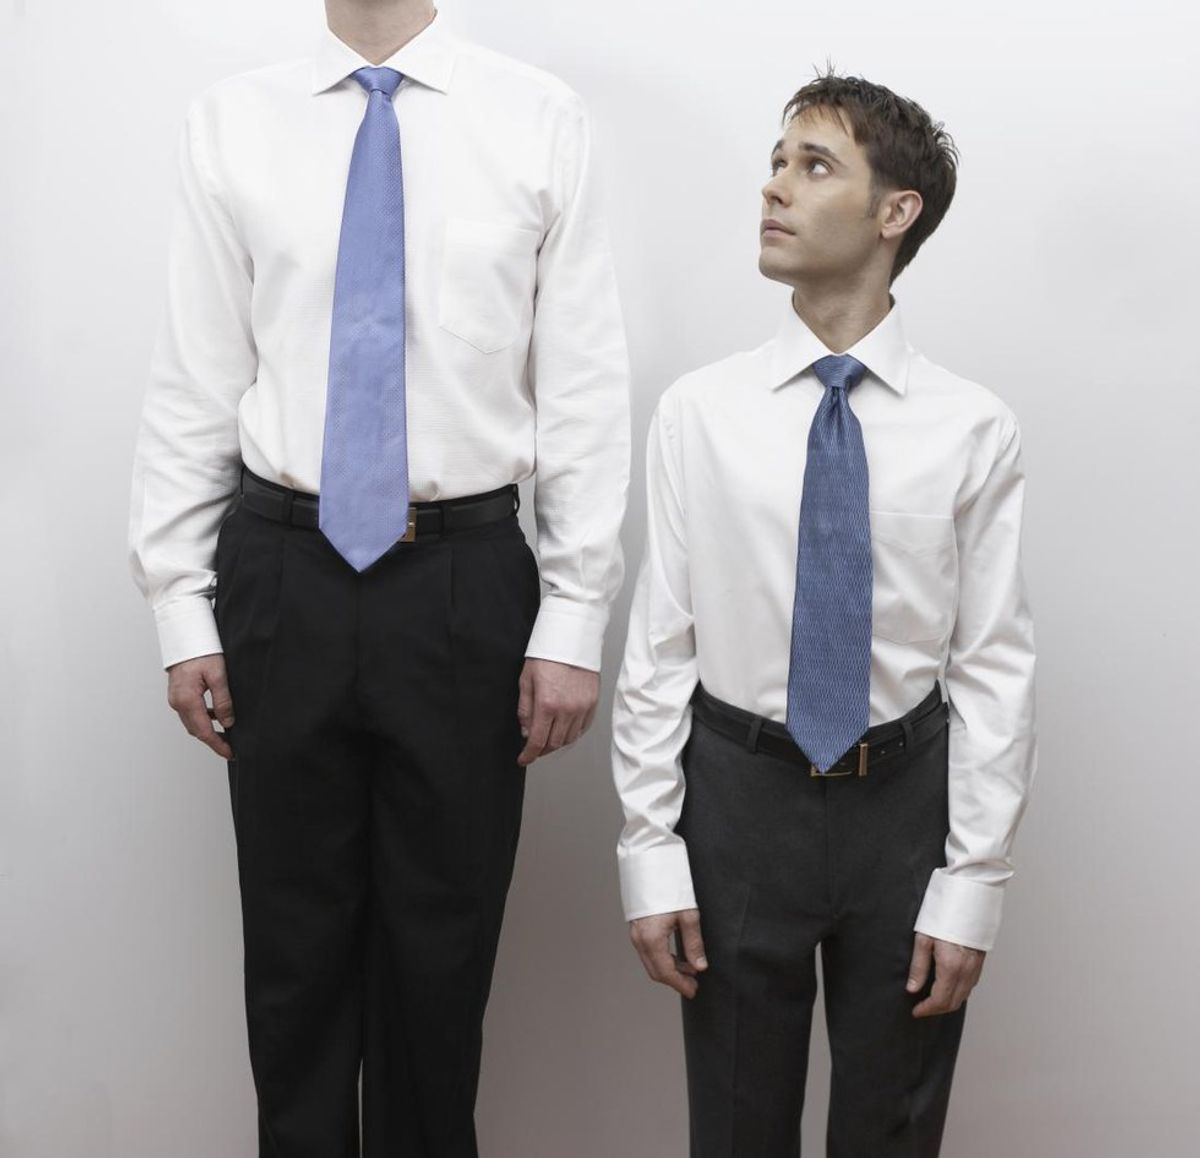 5 Ways To Tell Short People They're Short